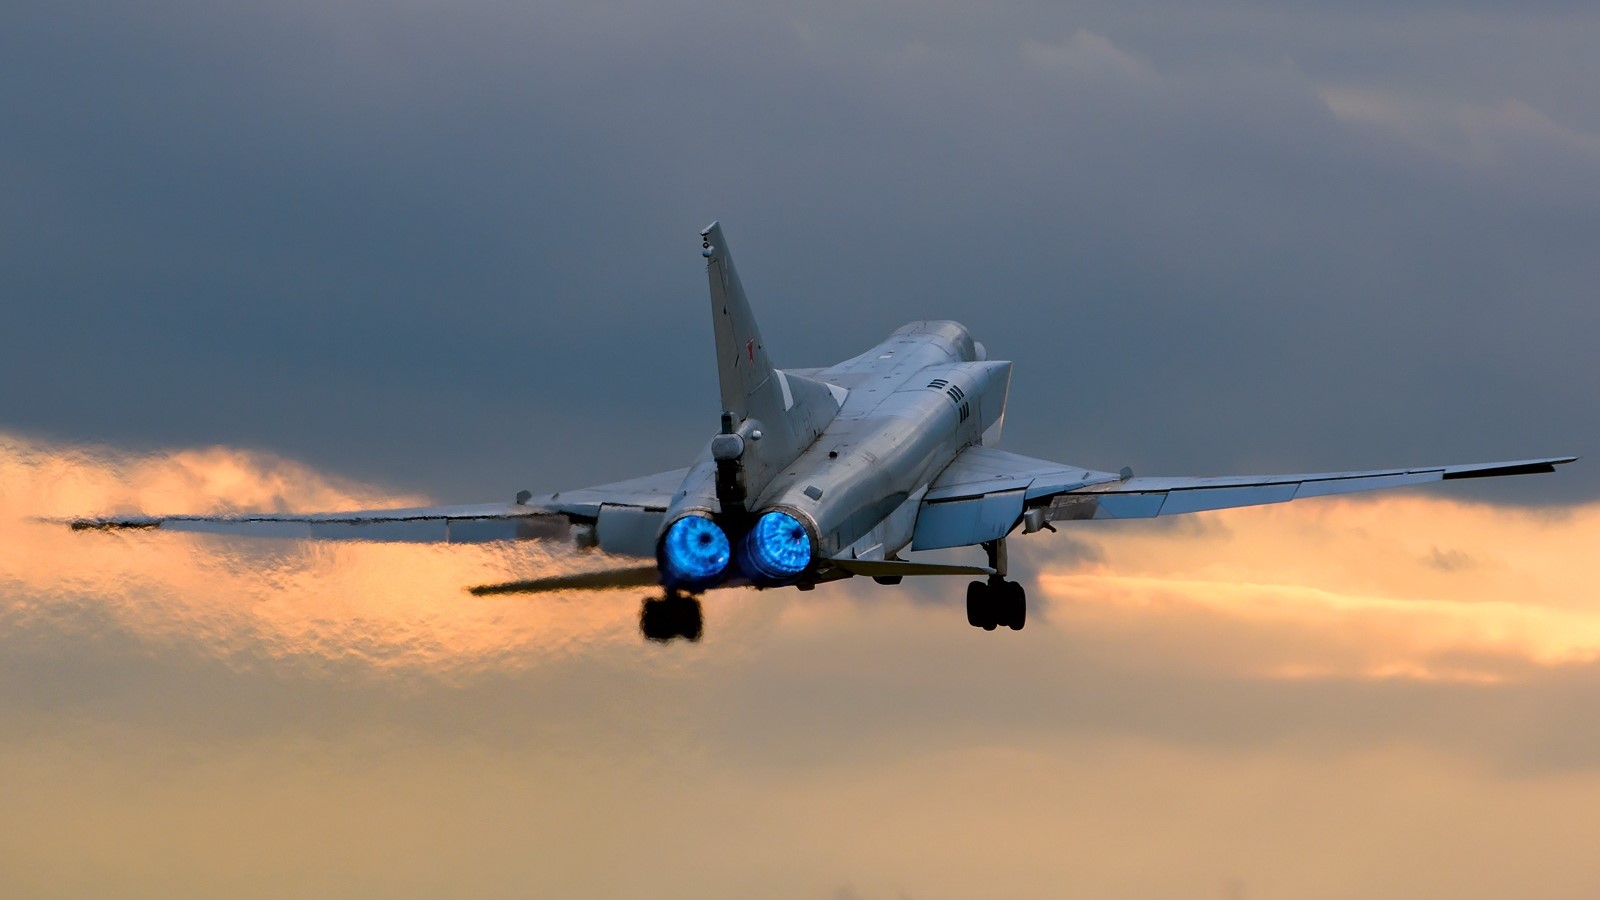 //Tu-22M / Archivbild zur Illustration (cropped) / File:Tupolev Tu-22M-3, Russia - Air Force AN2050083.jpg by Alex Beltyukov - RuSpotters Team is licensed under CC BY-SA 3.0. https://creativecommons.org/licenses/by-sa/3.0/